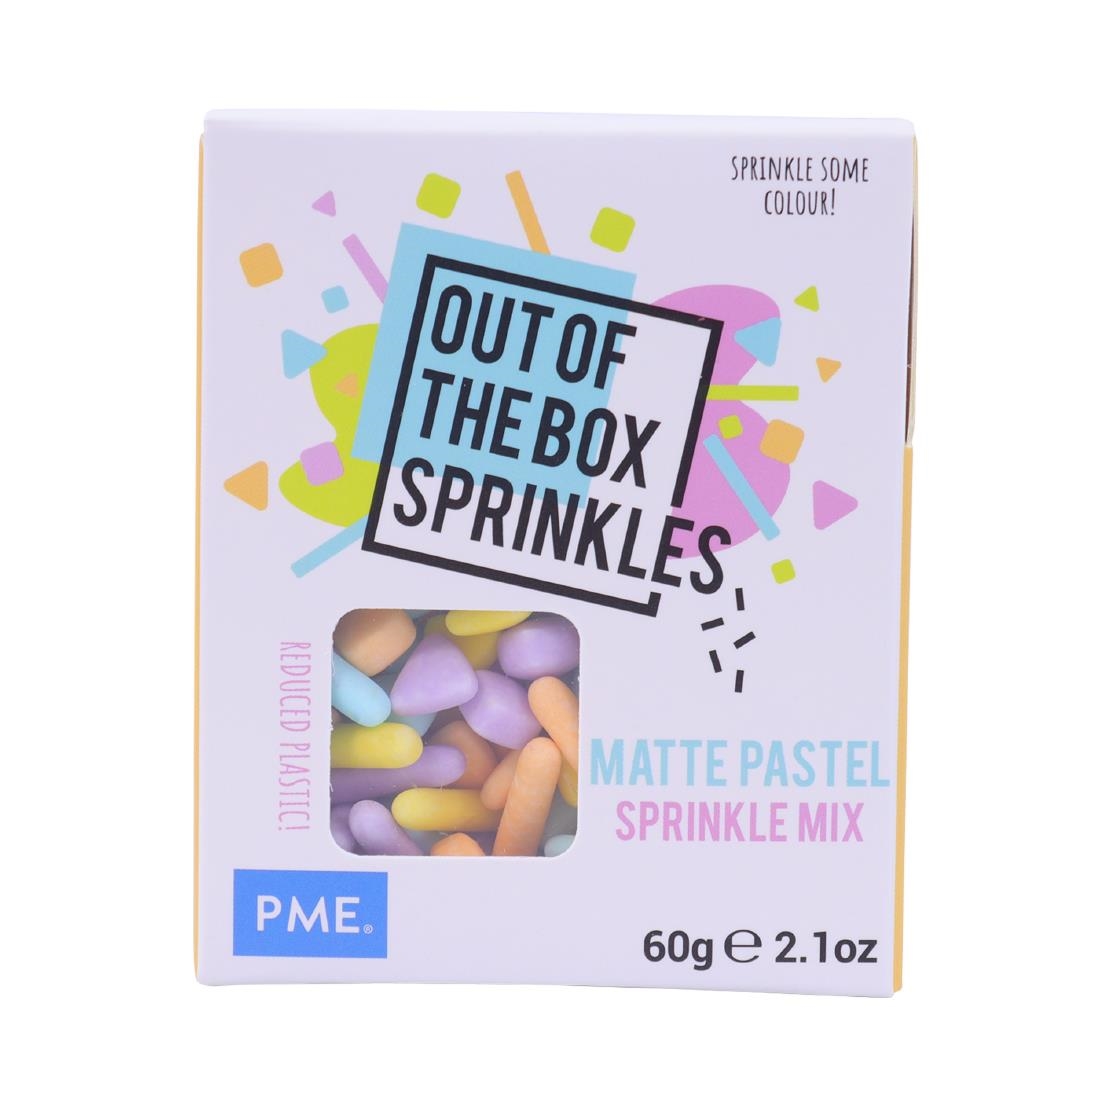 PME Out of the Box Matte Pastel Sprinkle Mix 60g (HU339)